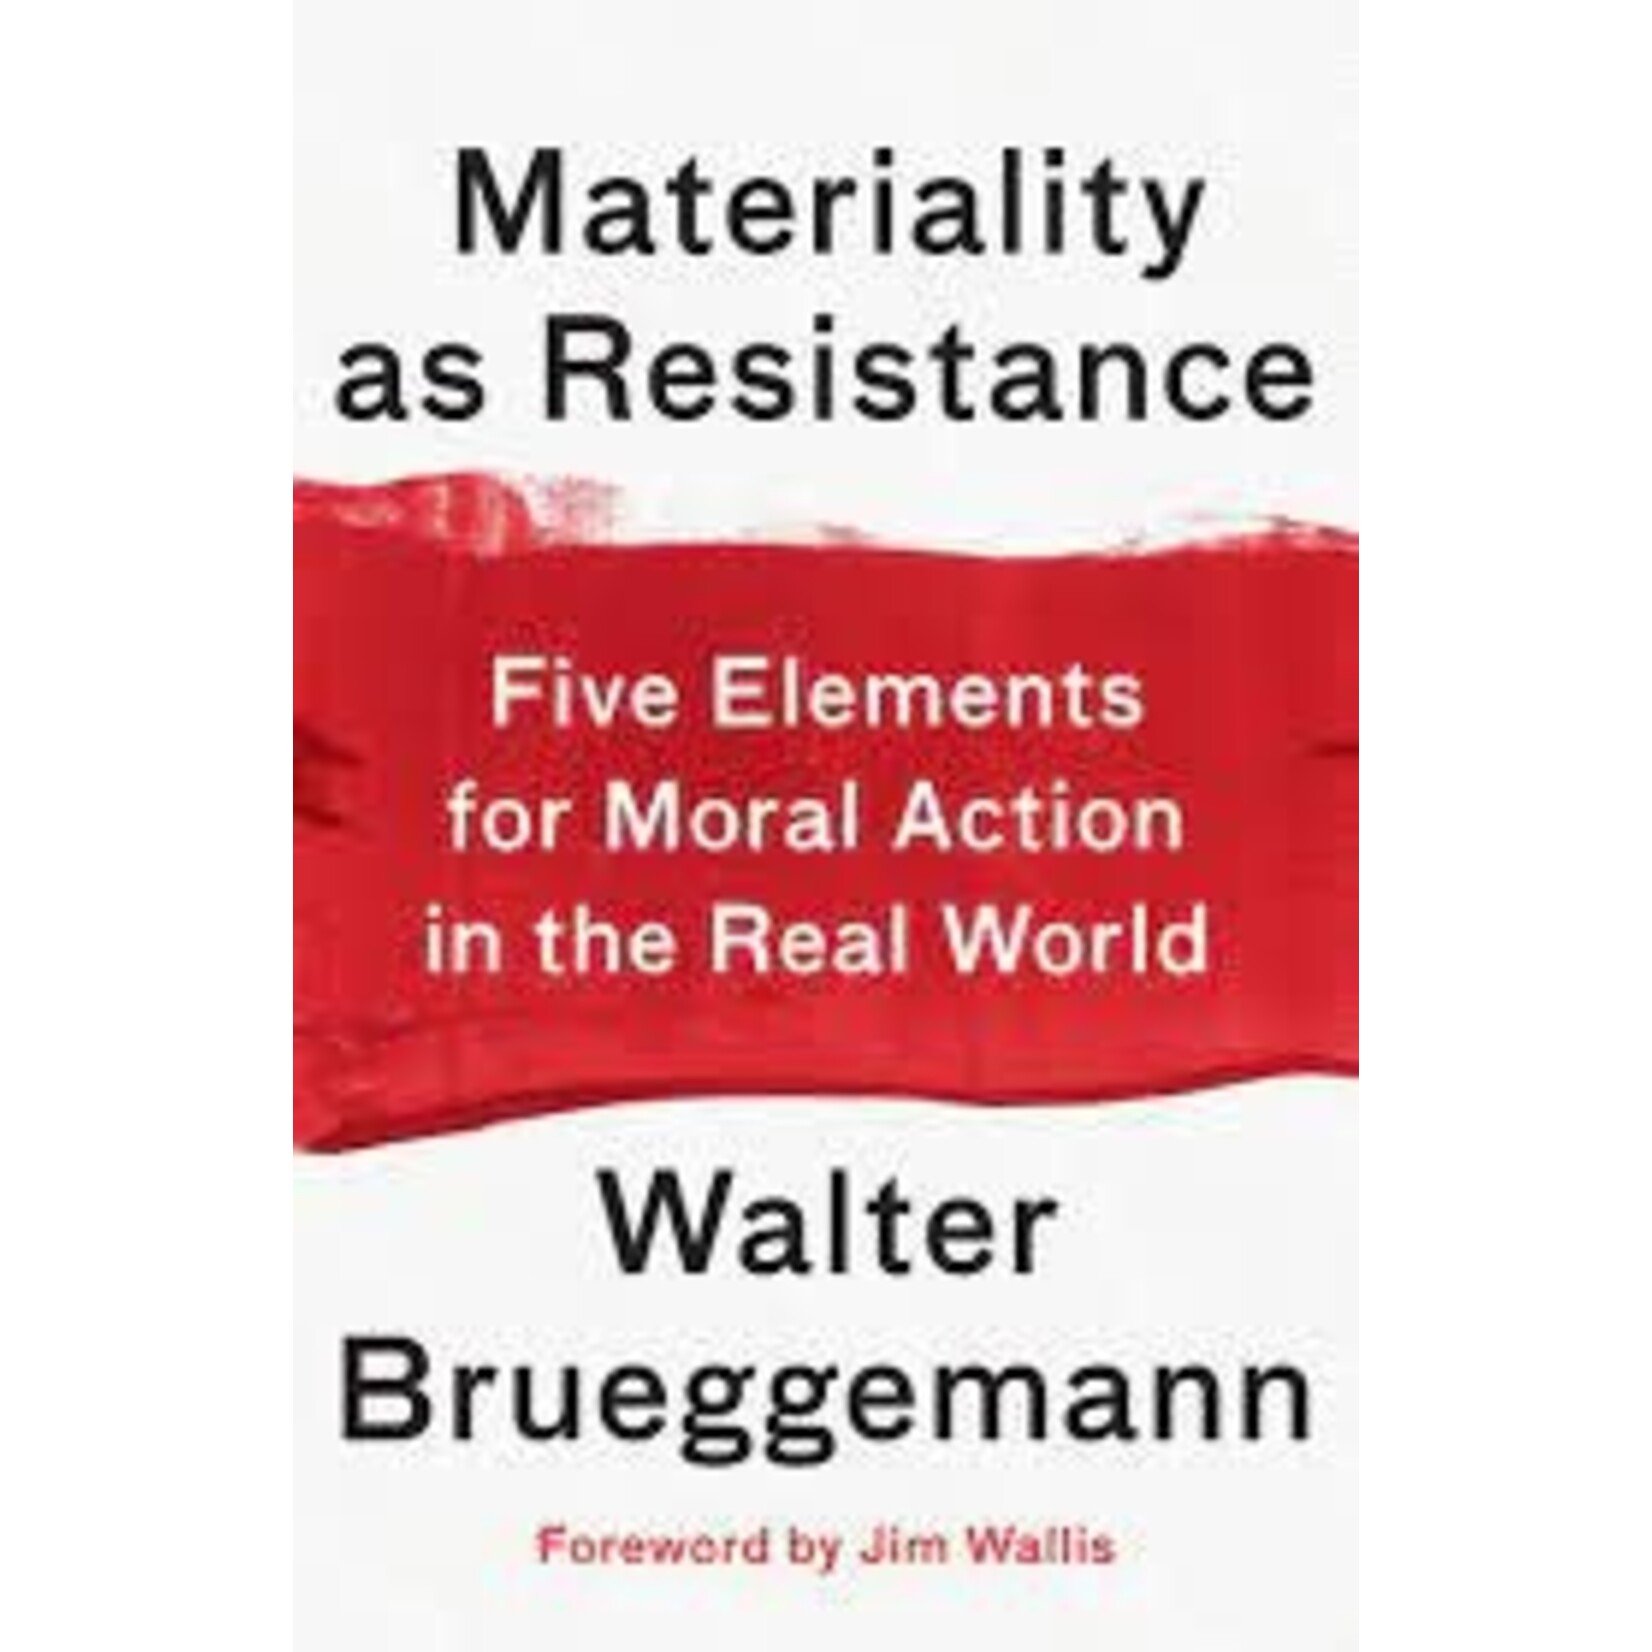 Materiality as Resistance. Five Elements for Moral Action in the Real World